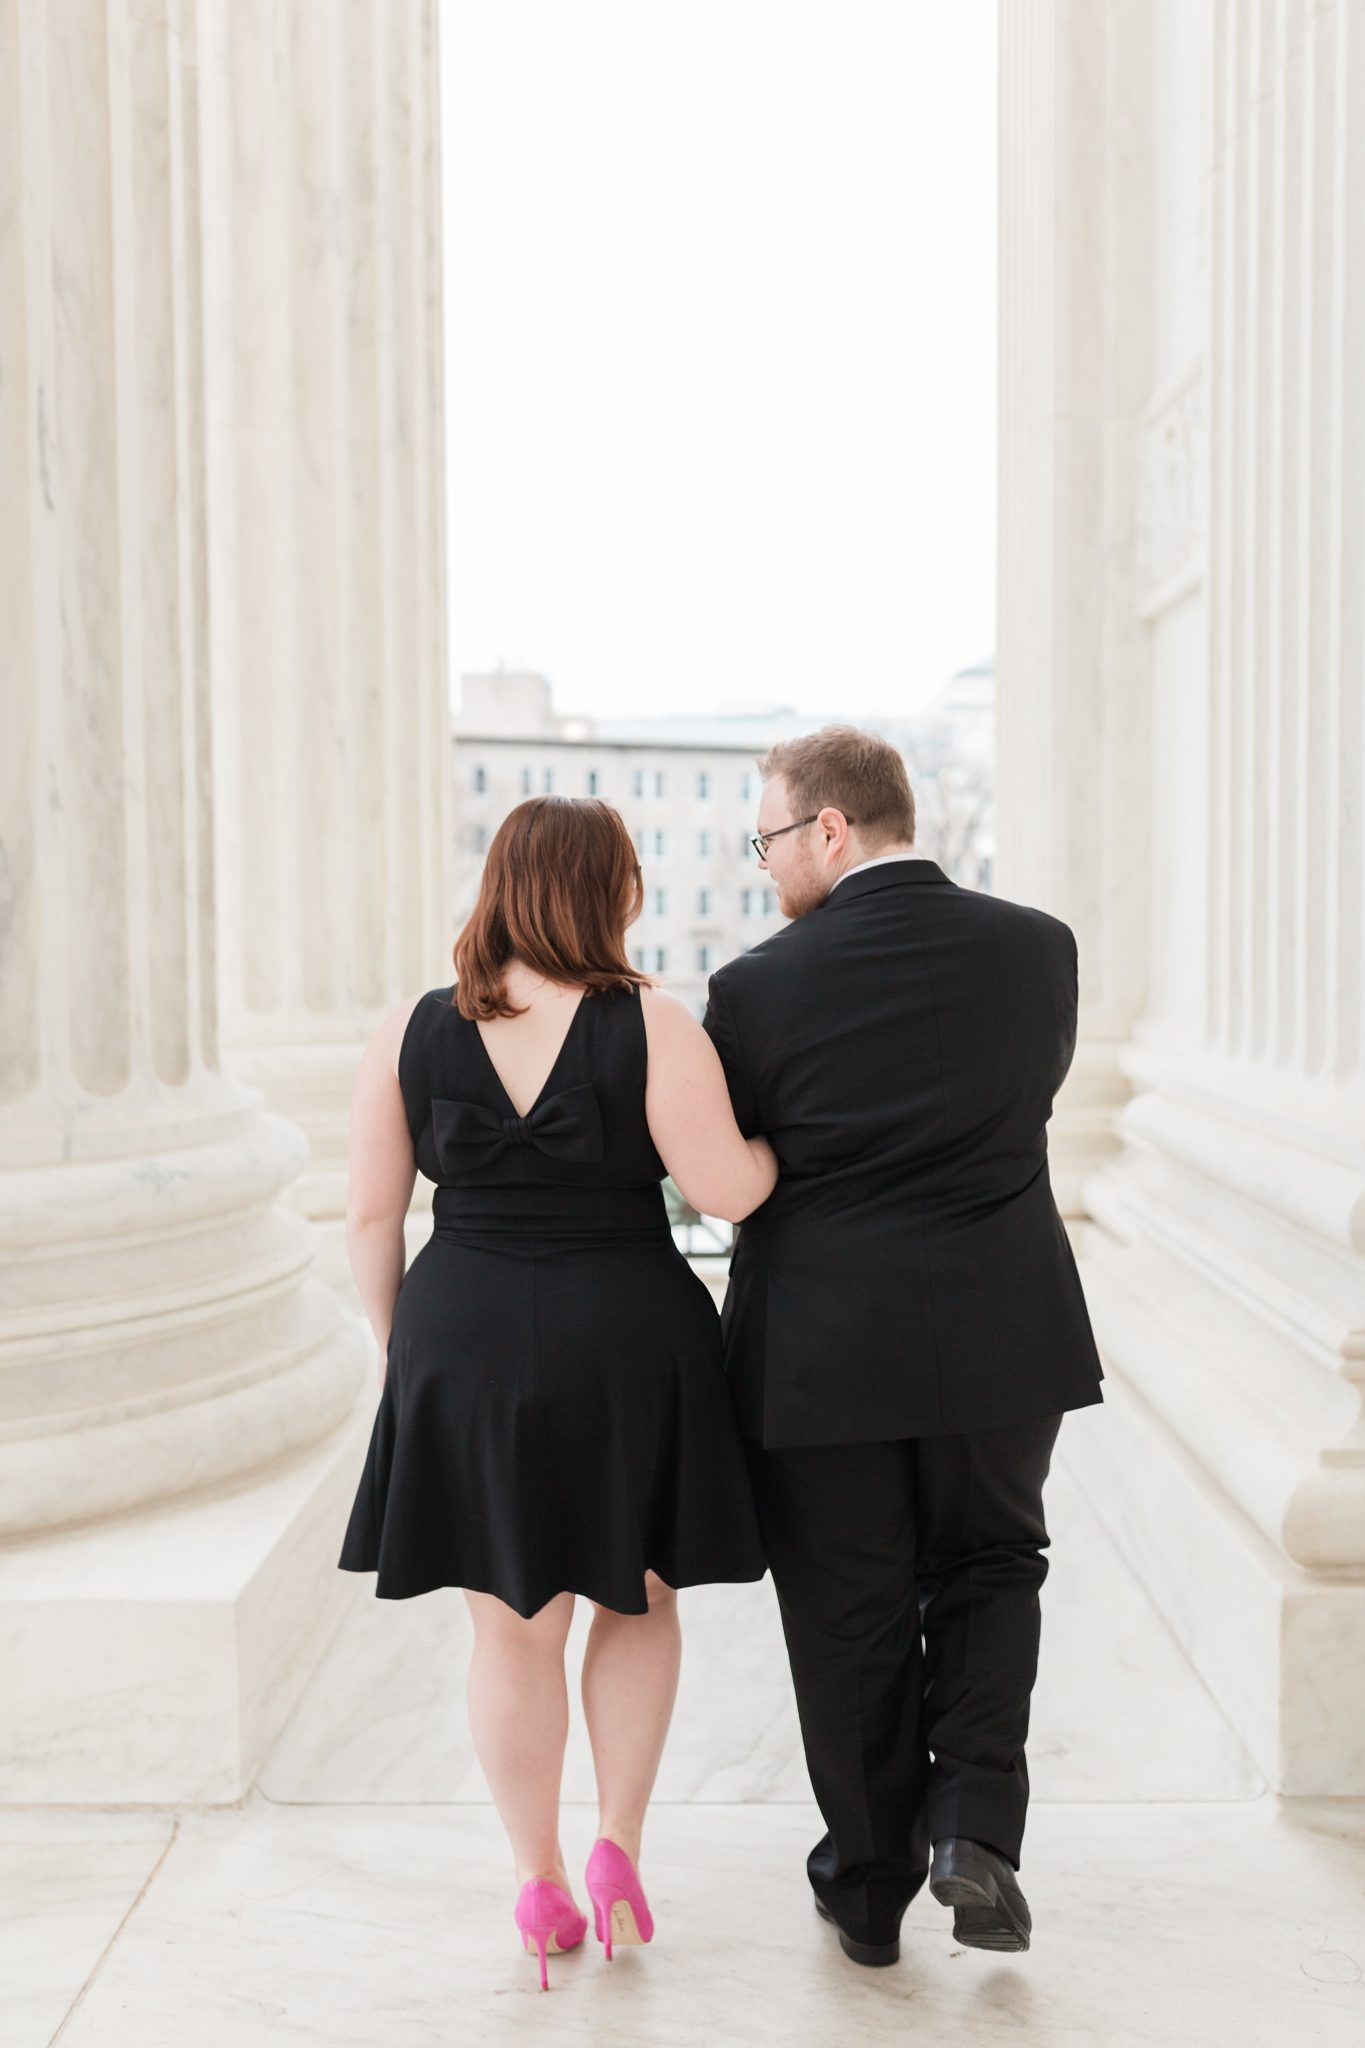 The iconic Supreme Court provides a stunning backdrop for spring engagement photos captured by Washington, DC wedding photographer, Alicia Lacey.